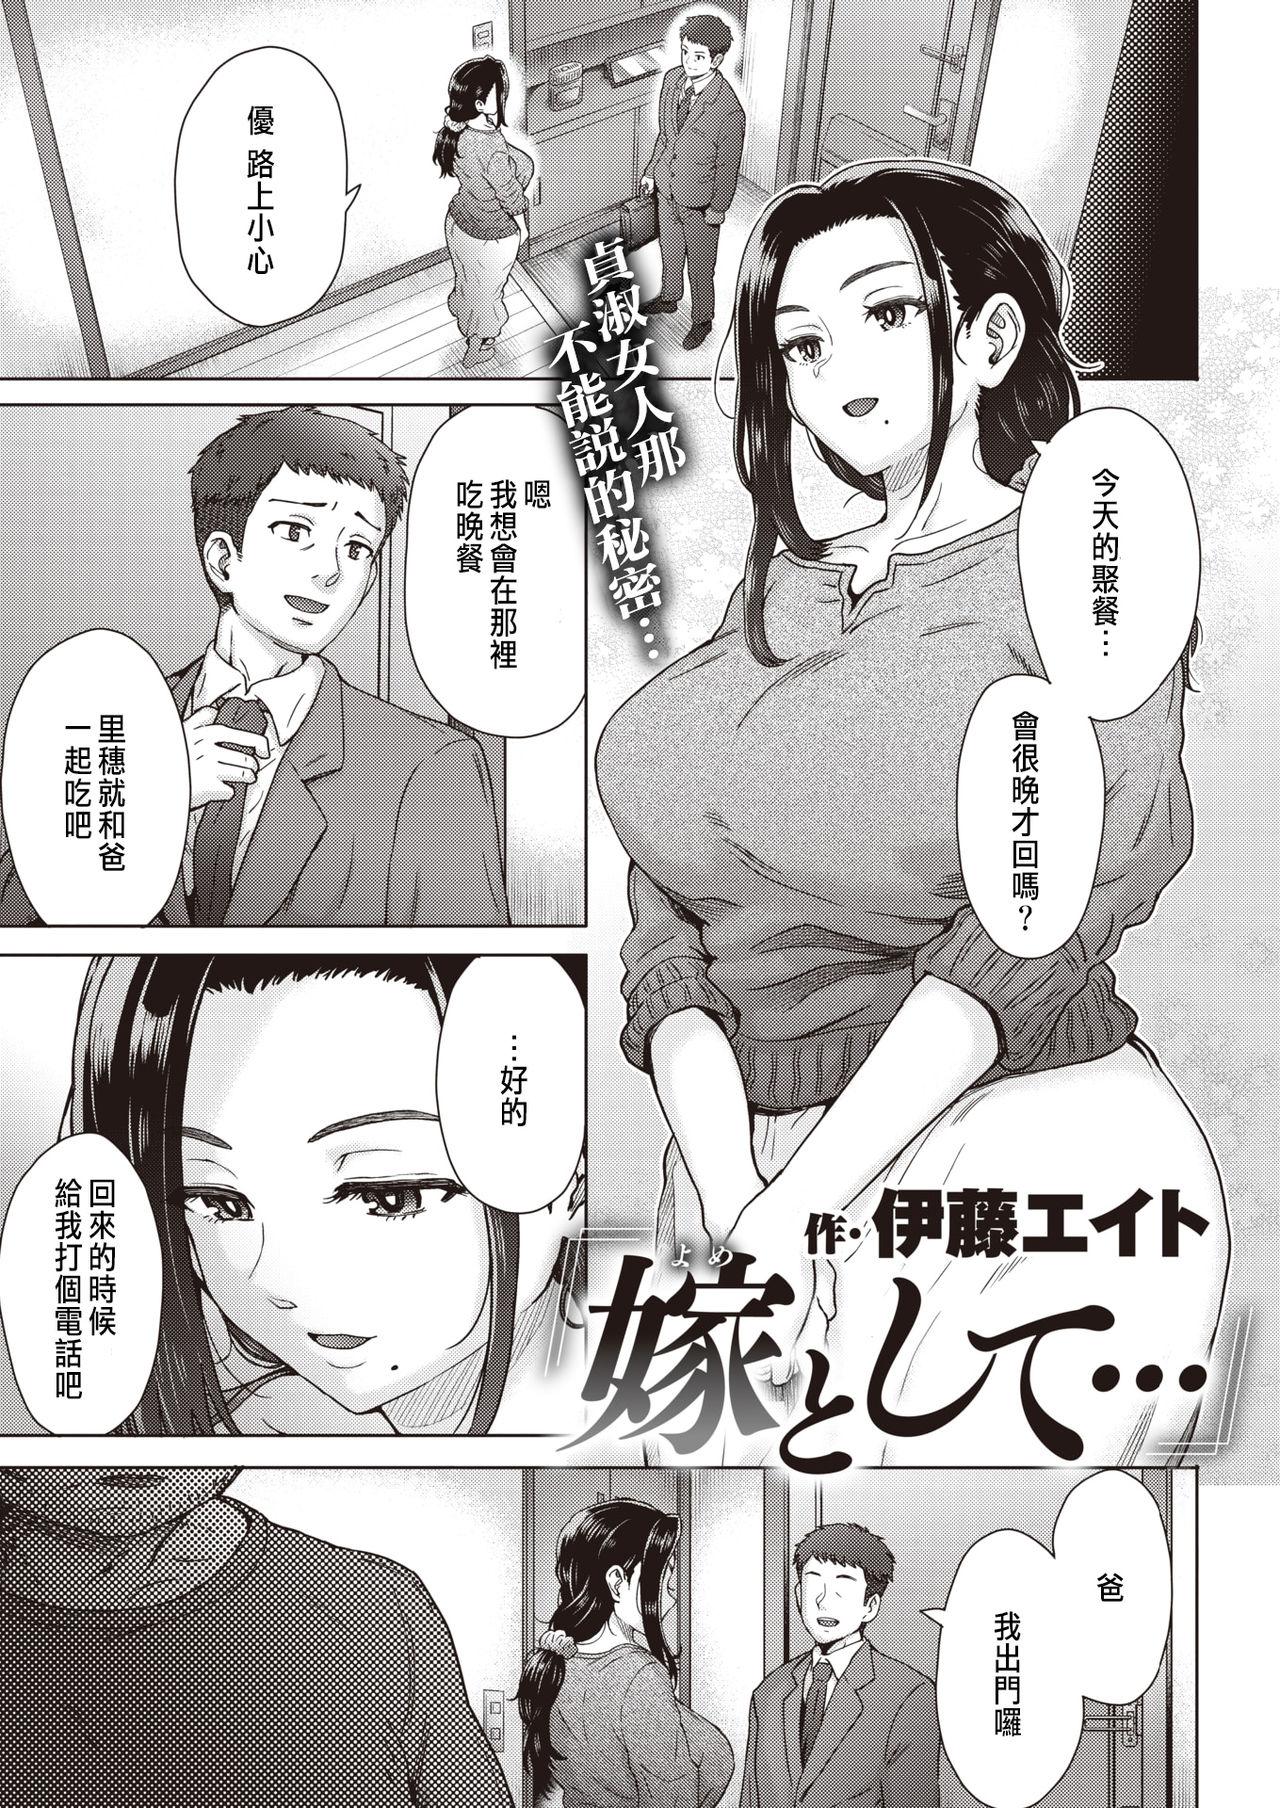 Fuck Porn 嫁として... Freckles - Page 1